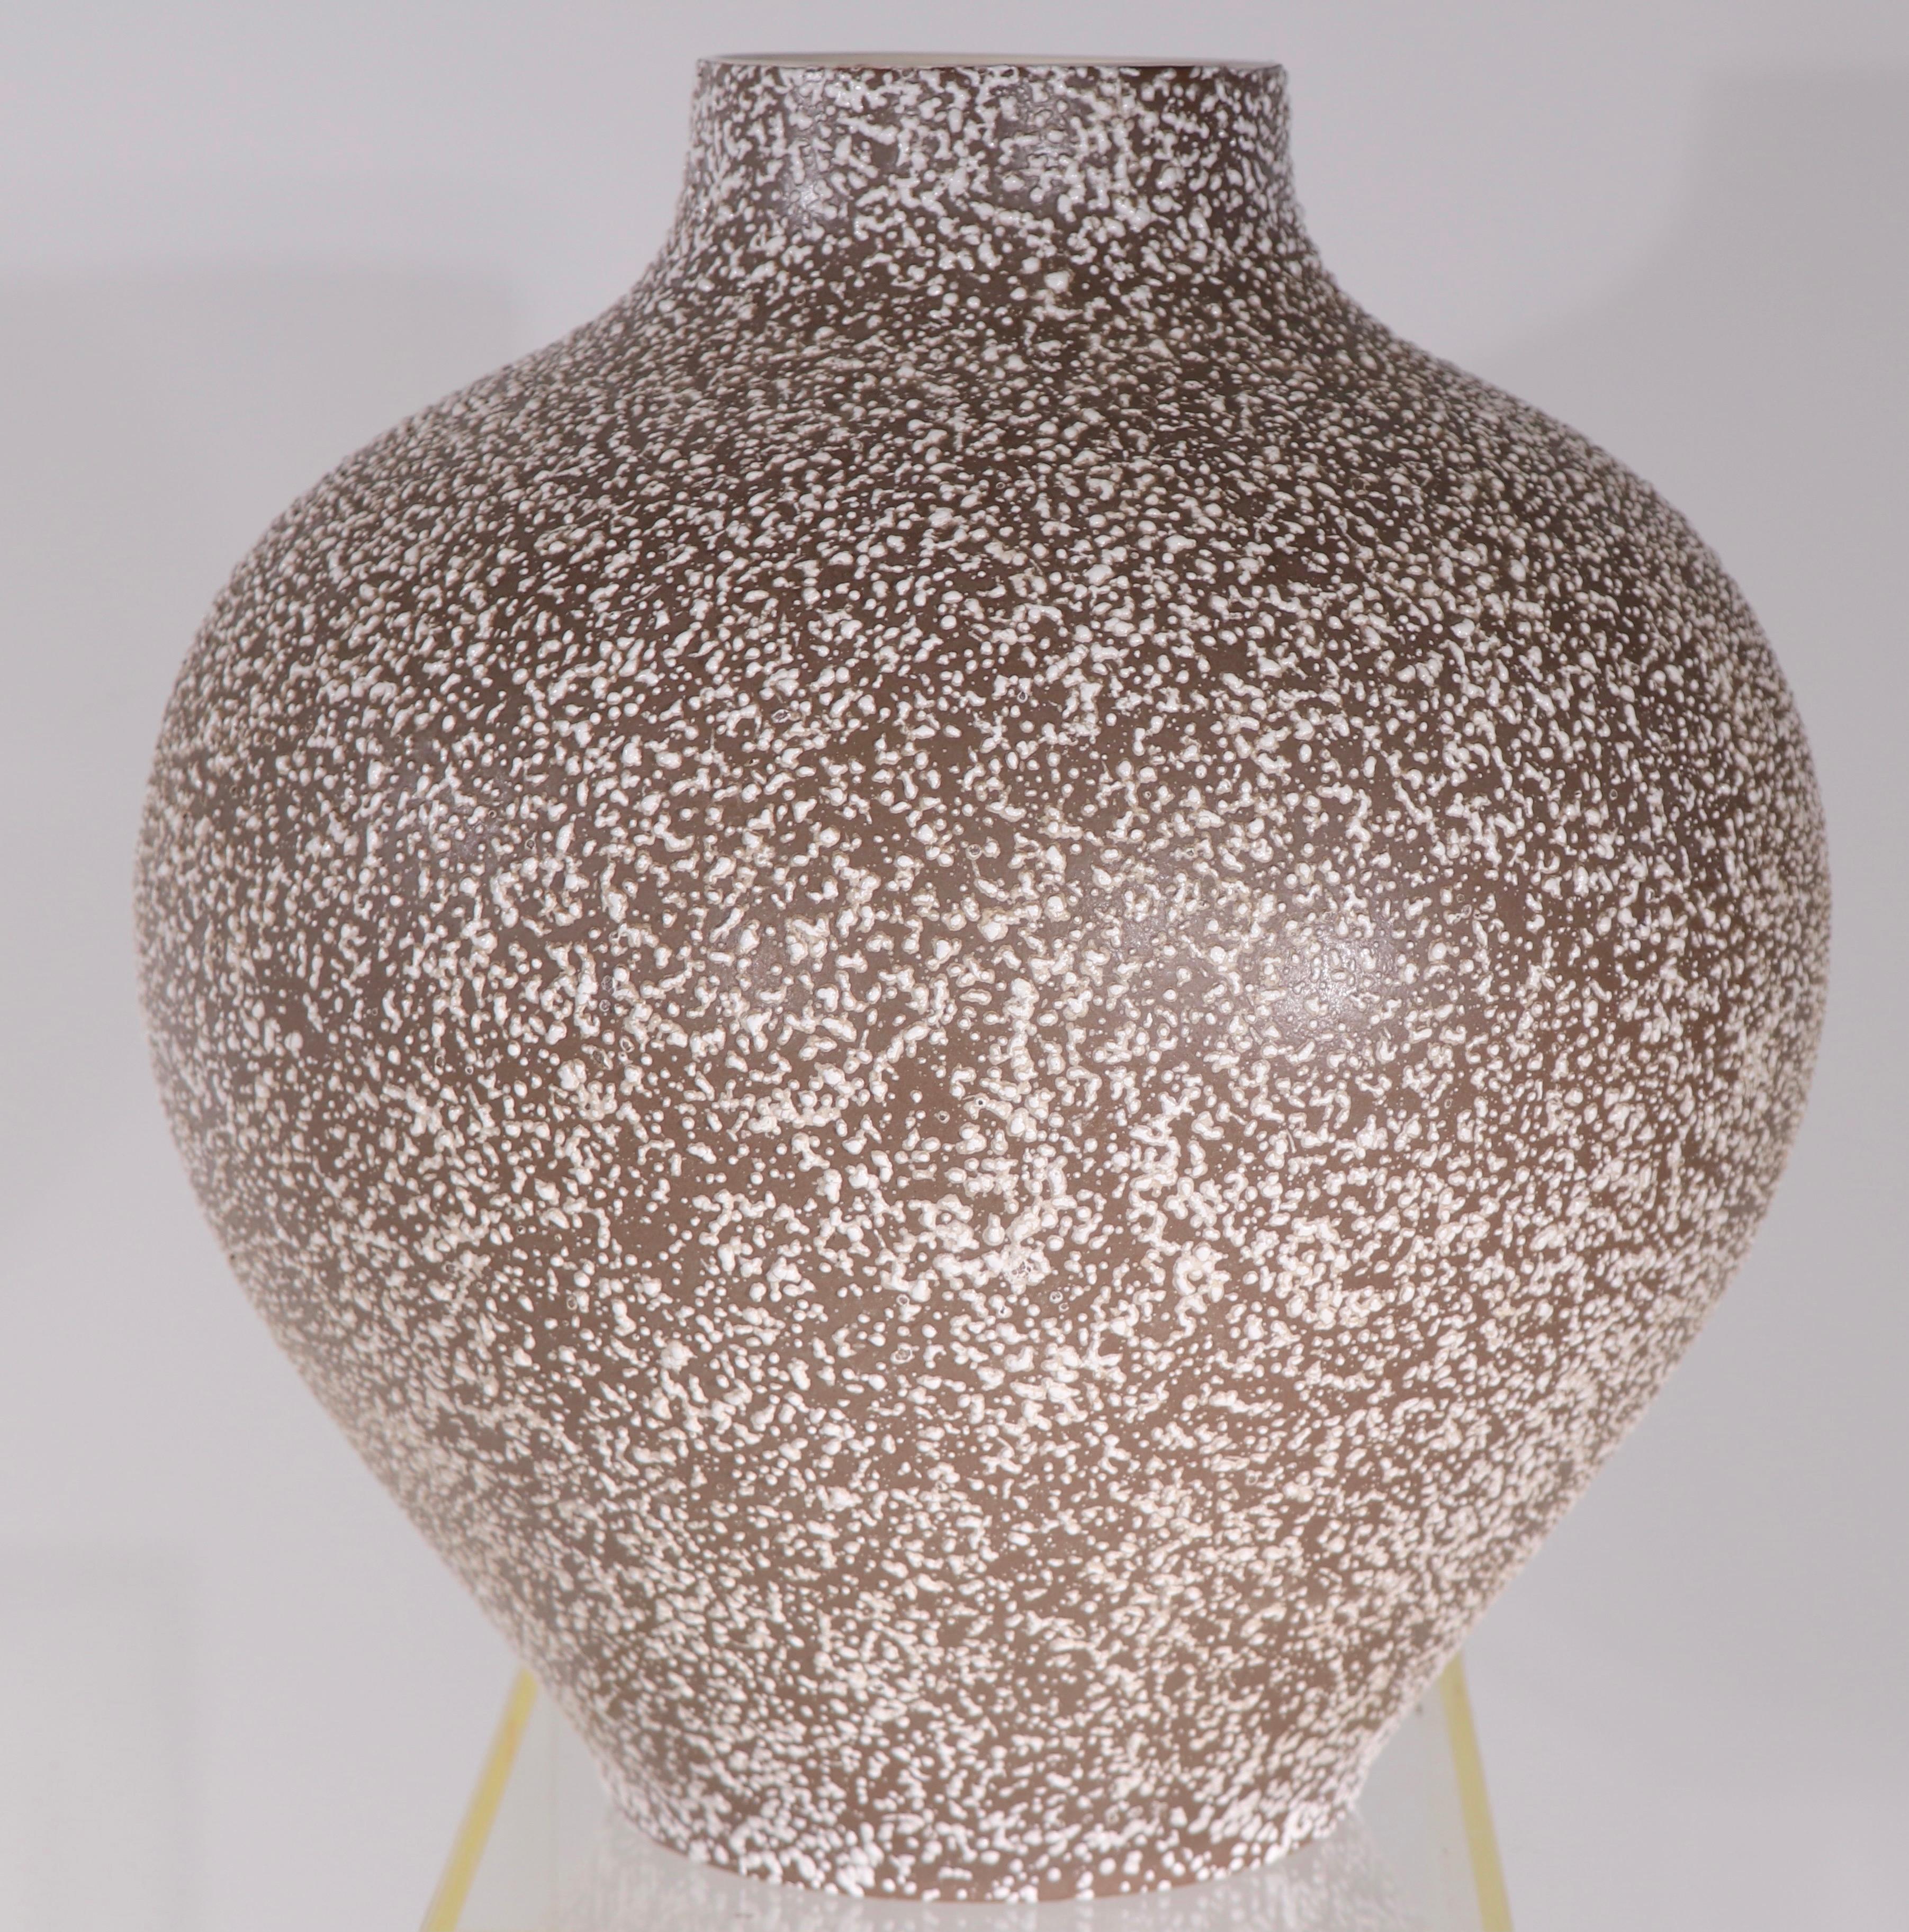 Impressive scale Royal Haeger vase in textured spatterware finish. This example is in excellent original condition, free of chips, cracks, damage or repairs, it is fully and correctly marked on verso. We have handled many pieces of hanger pottery,